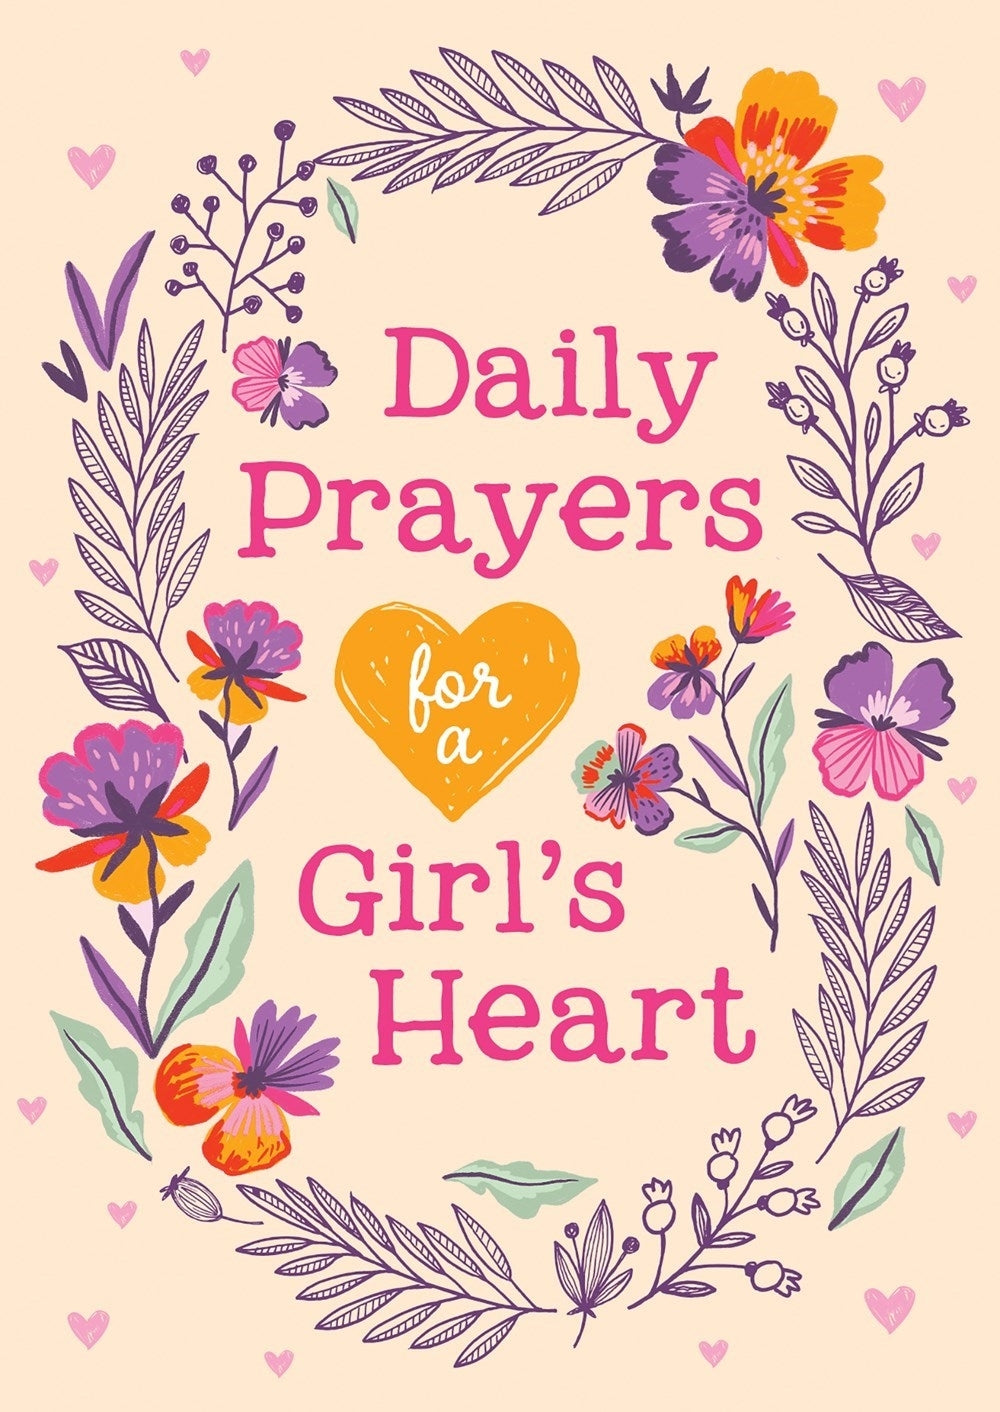 Daily Prayers for a Girl's Heart - The Christian Gift Company